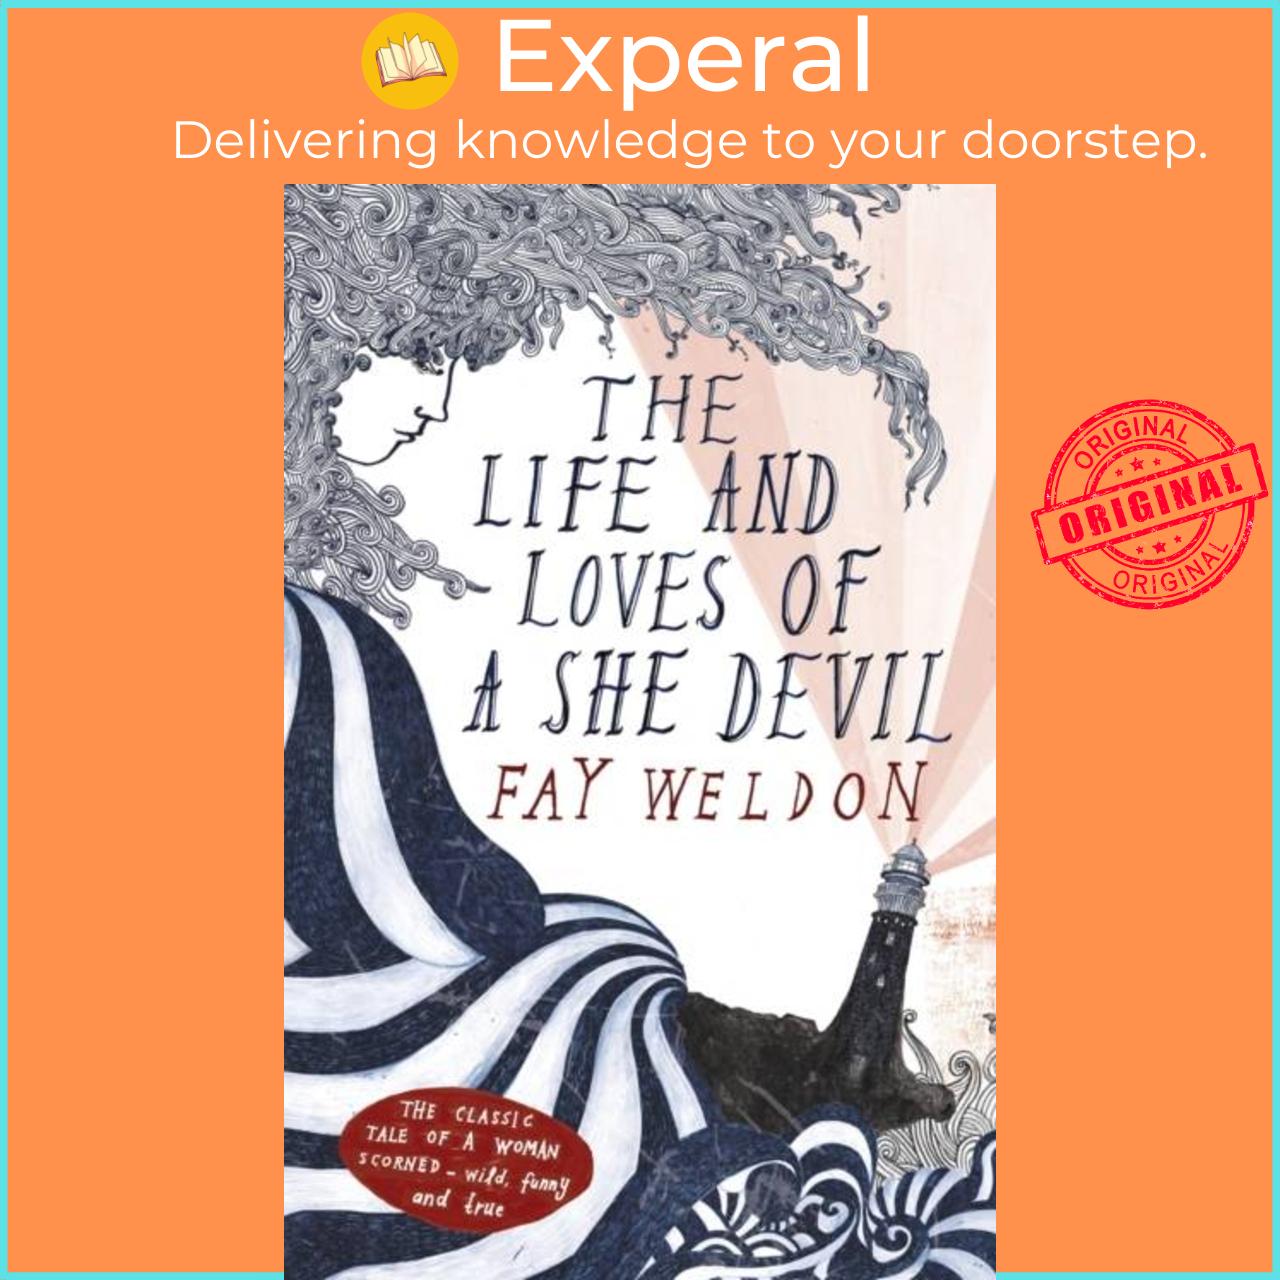 Sách - The Life and Loves of a She Devil by Fay Weldon (UK edition, paperback)